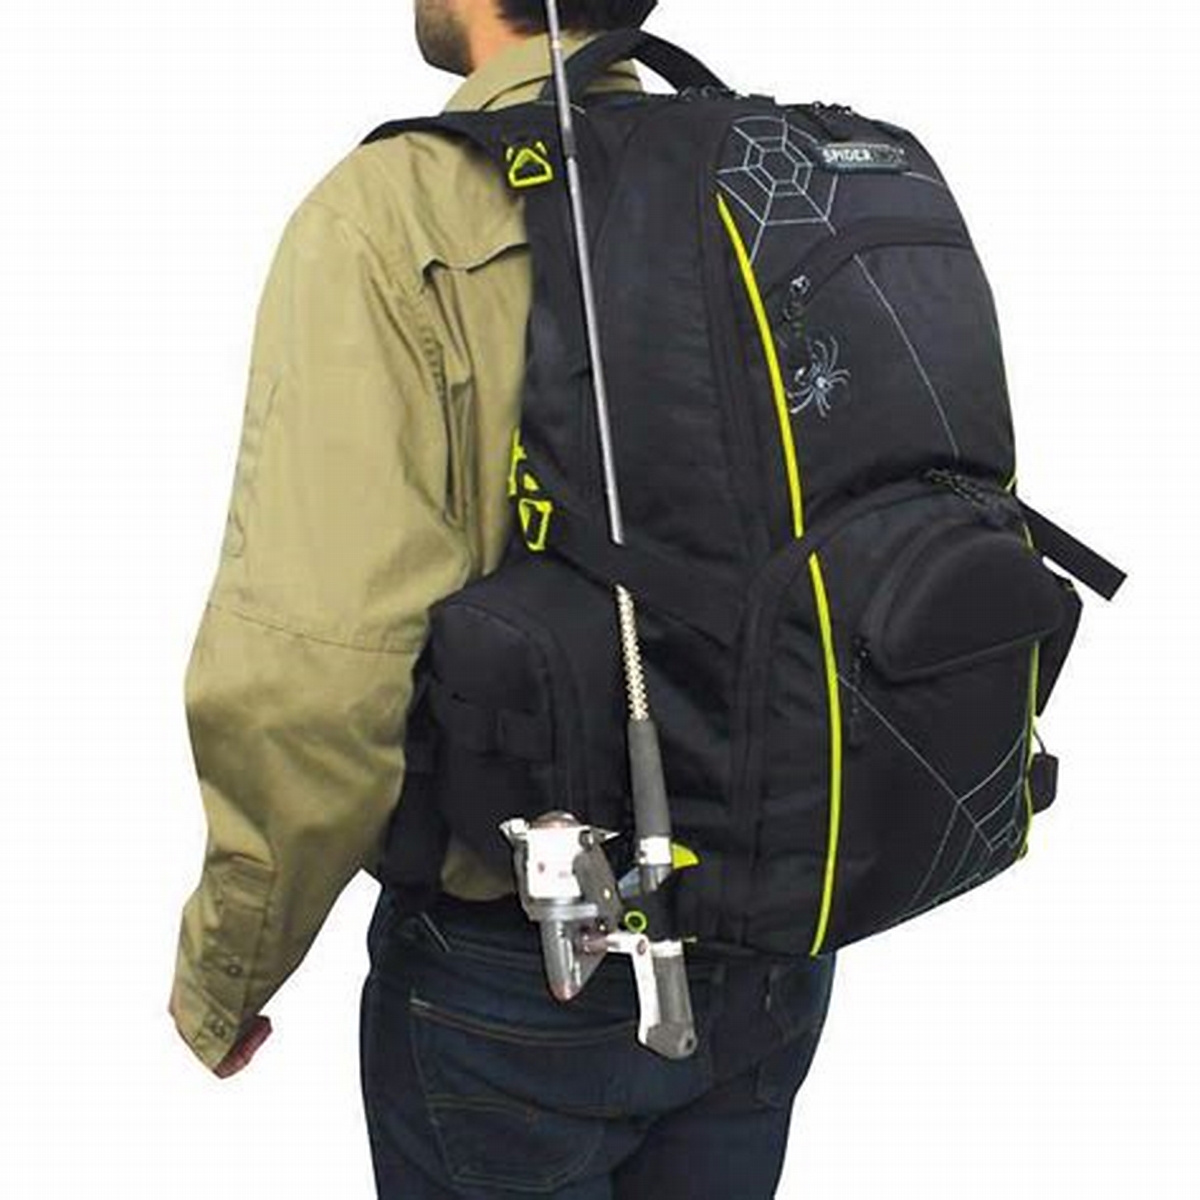 2024 Spiderwire fishing backpack comes The 